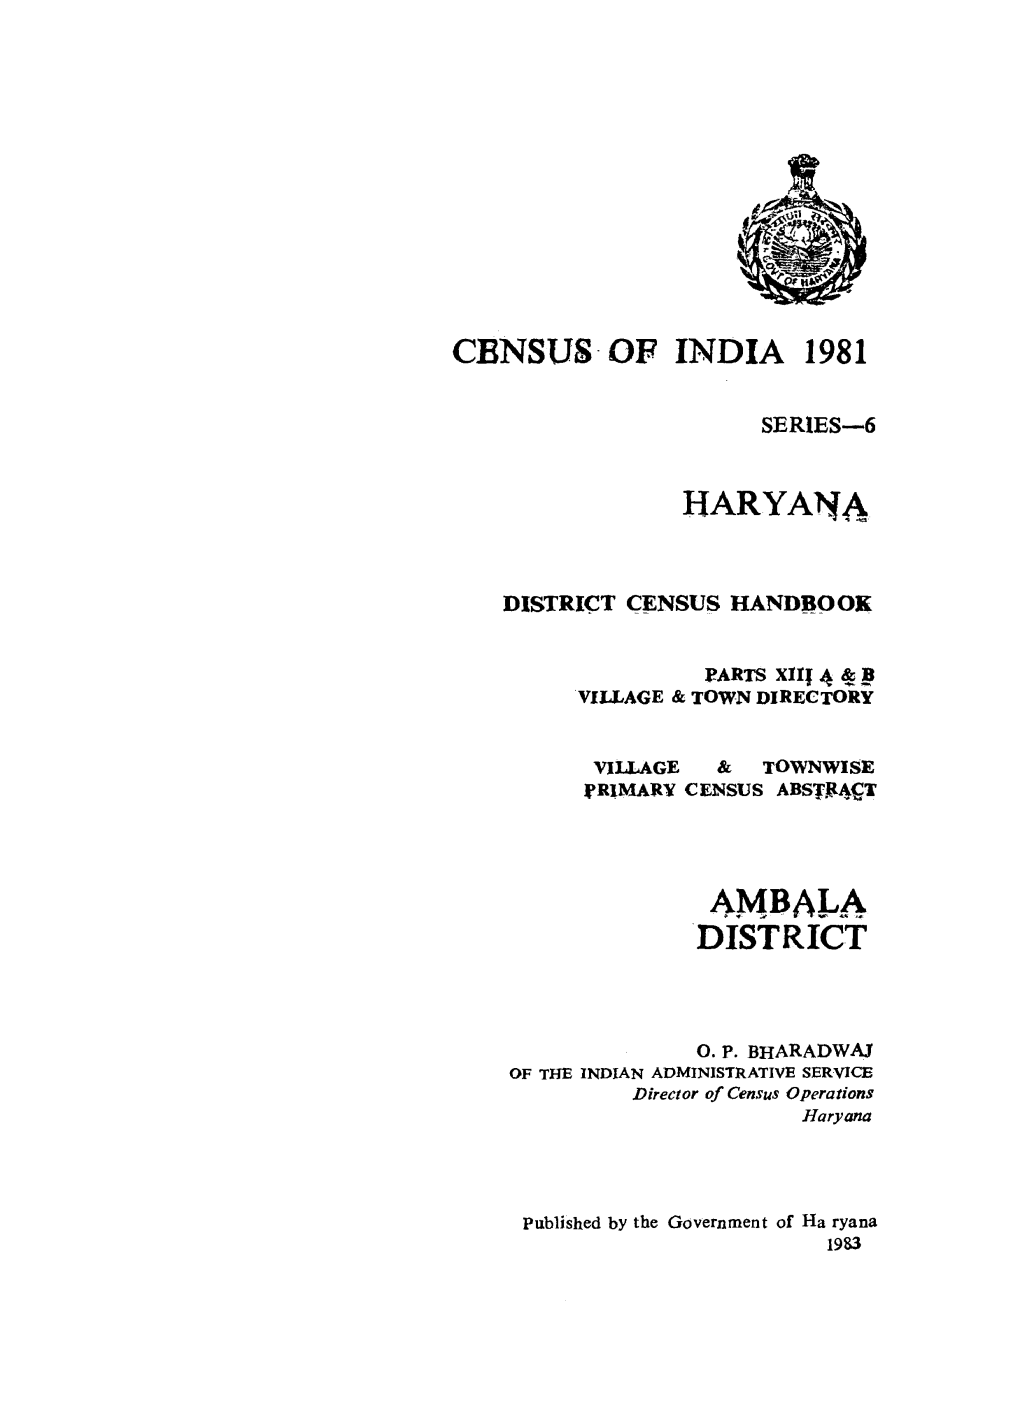 Parts Xiii-A& B, Village & Townwise Primary Census Abstract, Ambala, Series-6, Haryana